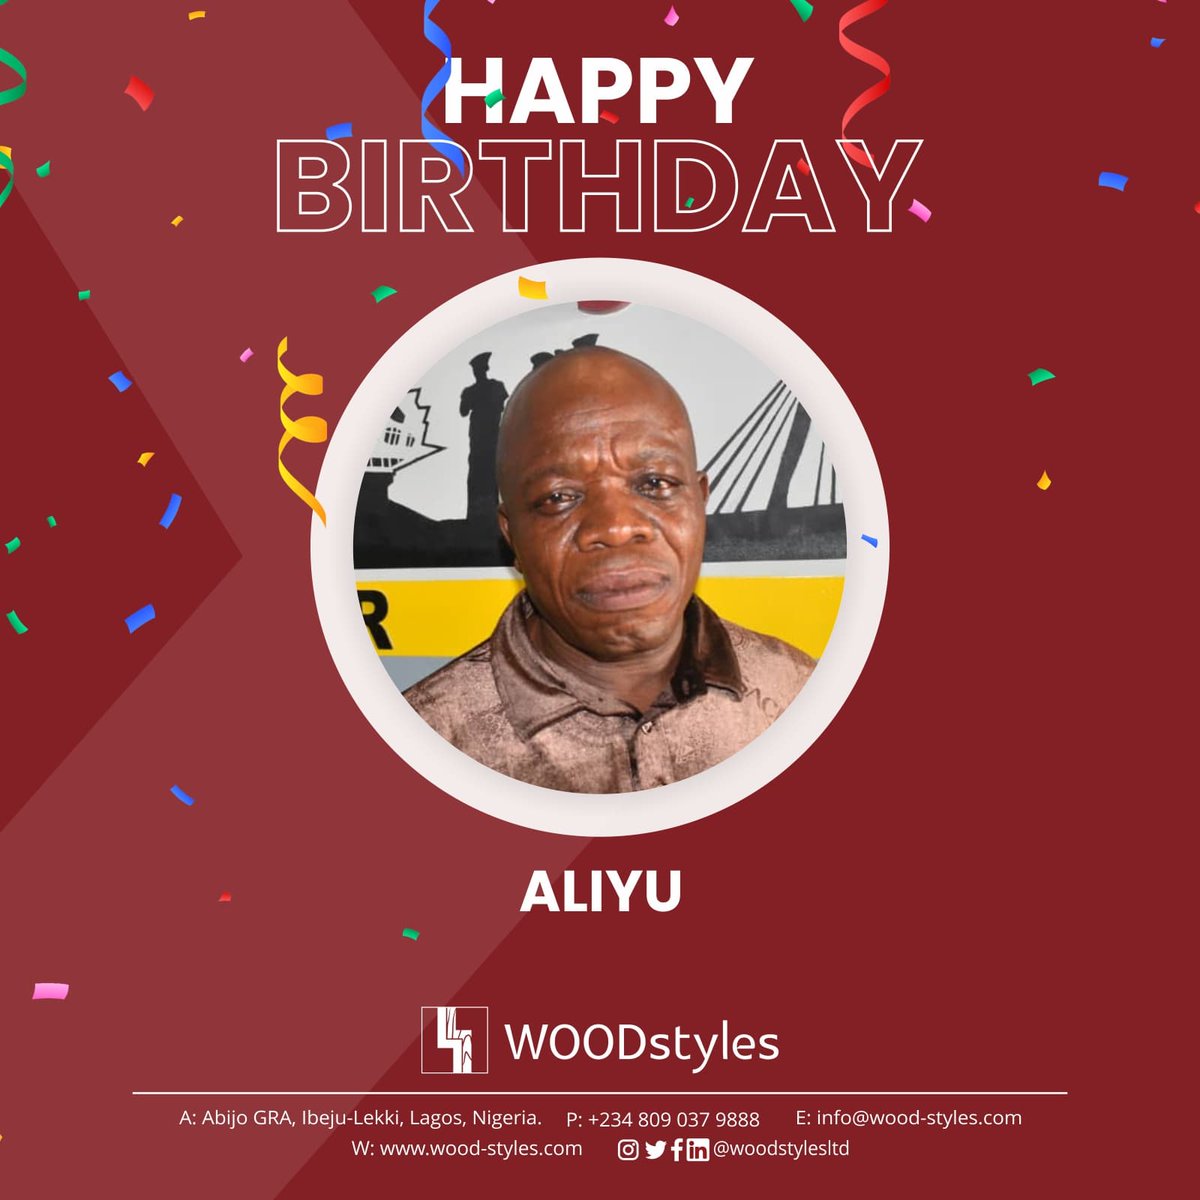 Happy Birthday Aliyu  ✨✨

We hope you have an amazing day and year ahead.

From the WOODstyleRS 💓

#WOODstyleRS #woodstyles #woodstylesltd #birthdaywishescometrue #birthdayshout #interiordesign #joinery #interiorinspiration #woodstylesprojects #joinerydesign